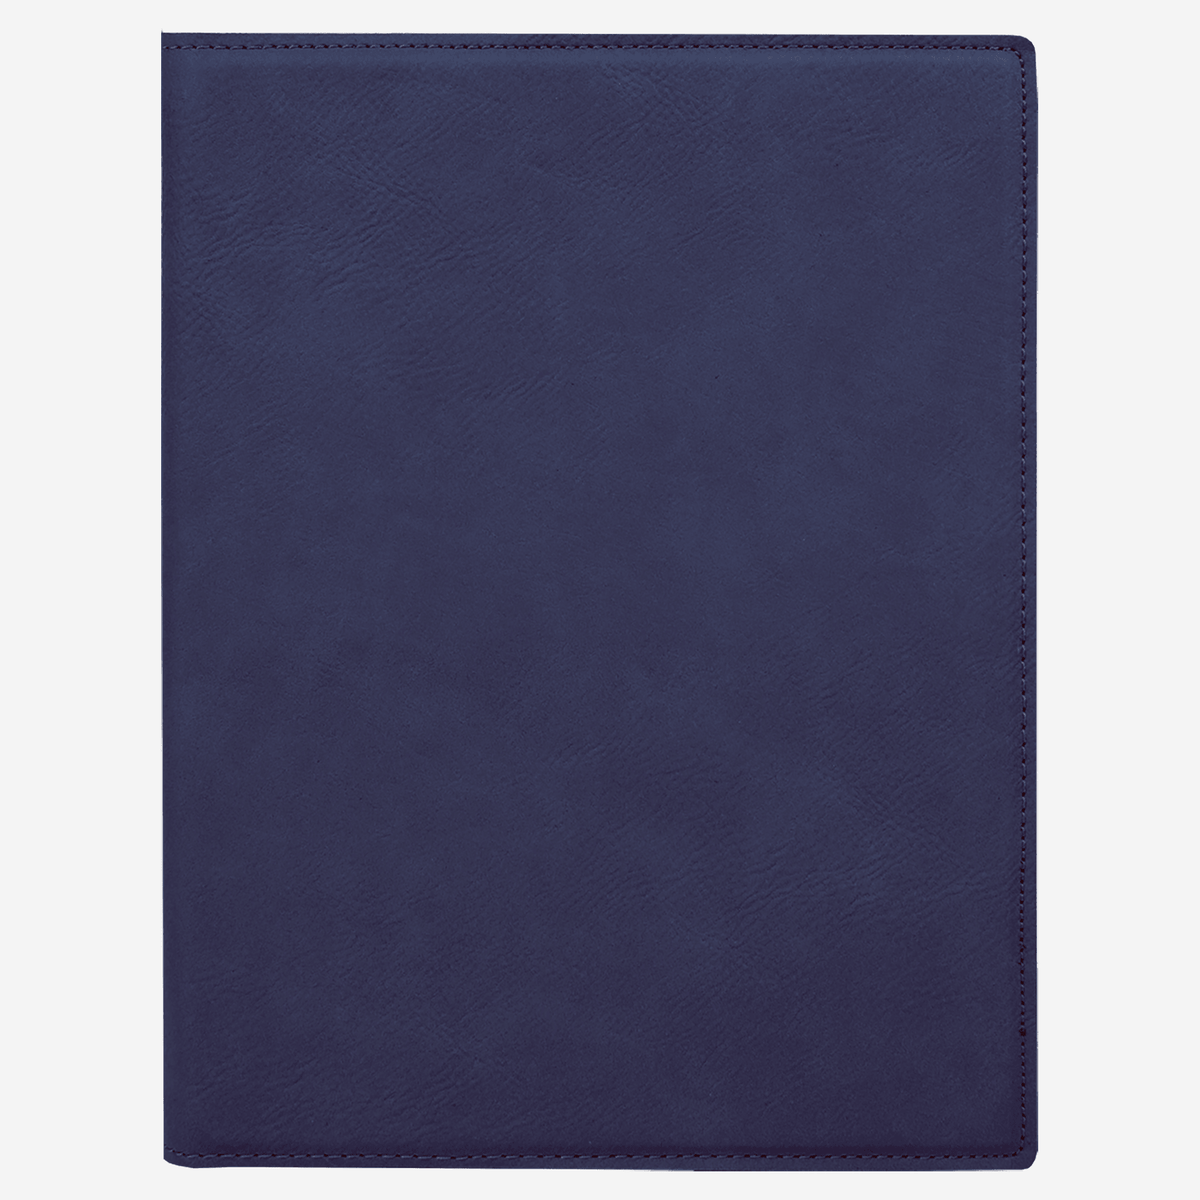 7" x 9" Laserable Navy Blue  Leatherette Small Portfolio with Notepad closed with no engraving